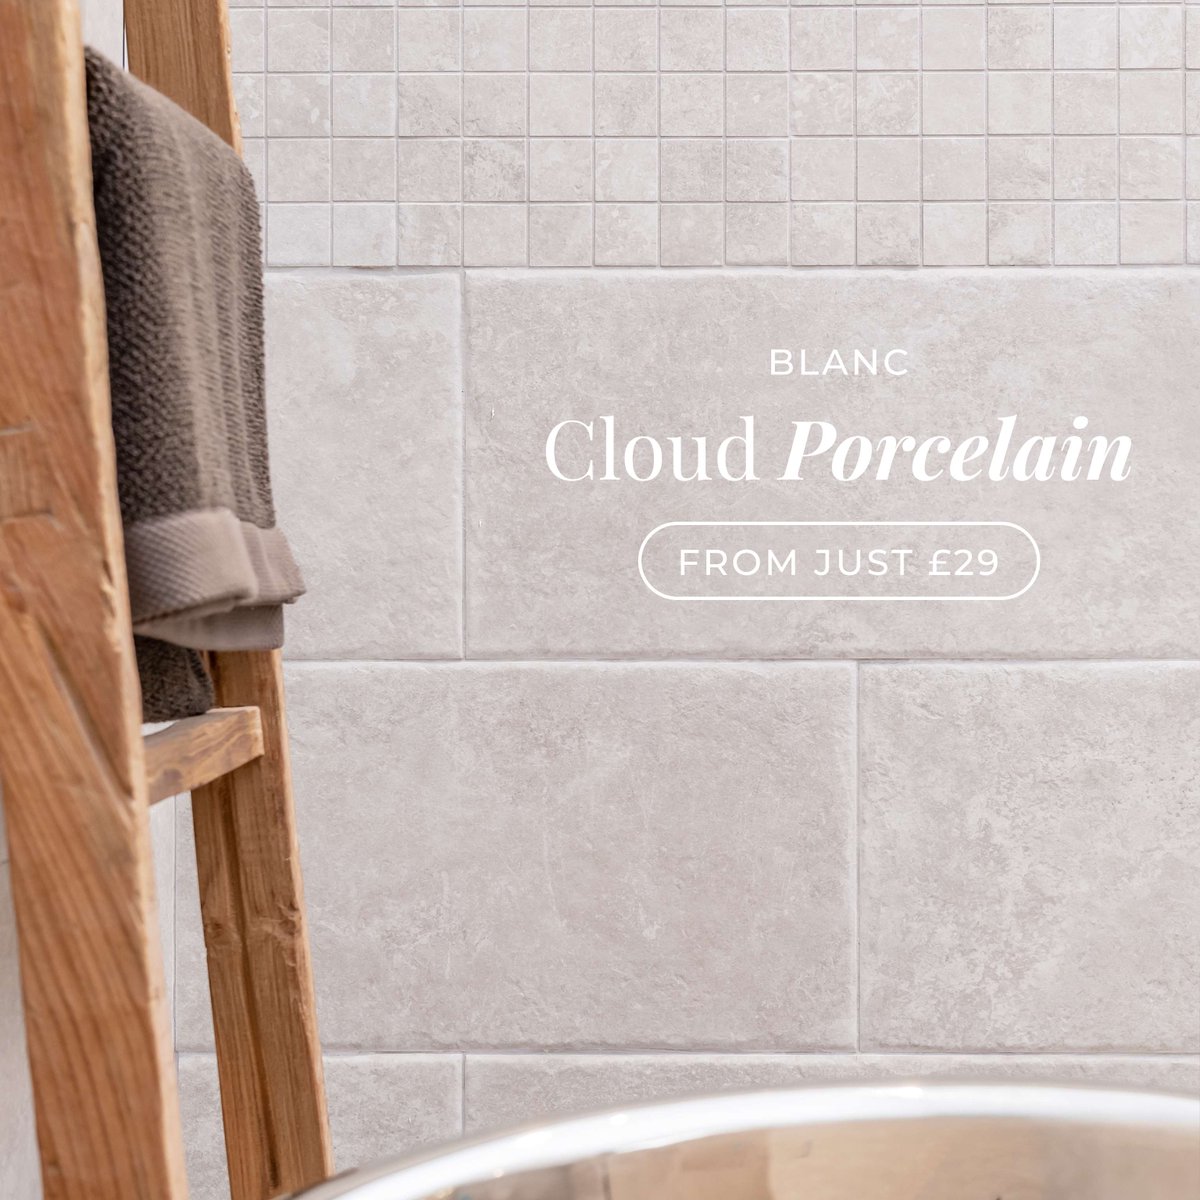 Sink into #luxury with our #Cloud Porcelain in shade Blanc. Inspired by the famous #PierreDeBourgogne #French limestone, this Blanc colour variation captures the same colour variation and subtle mottling found in the original #stone. beswickstone.co.uk/cloud-blanc-po…